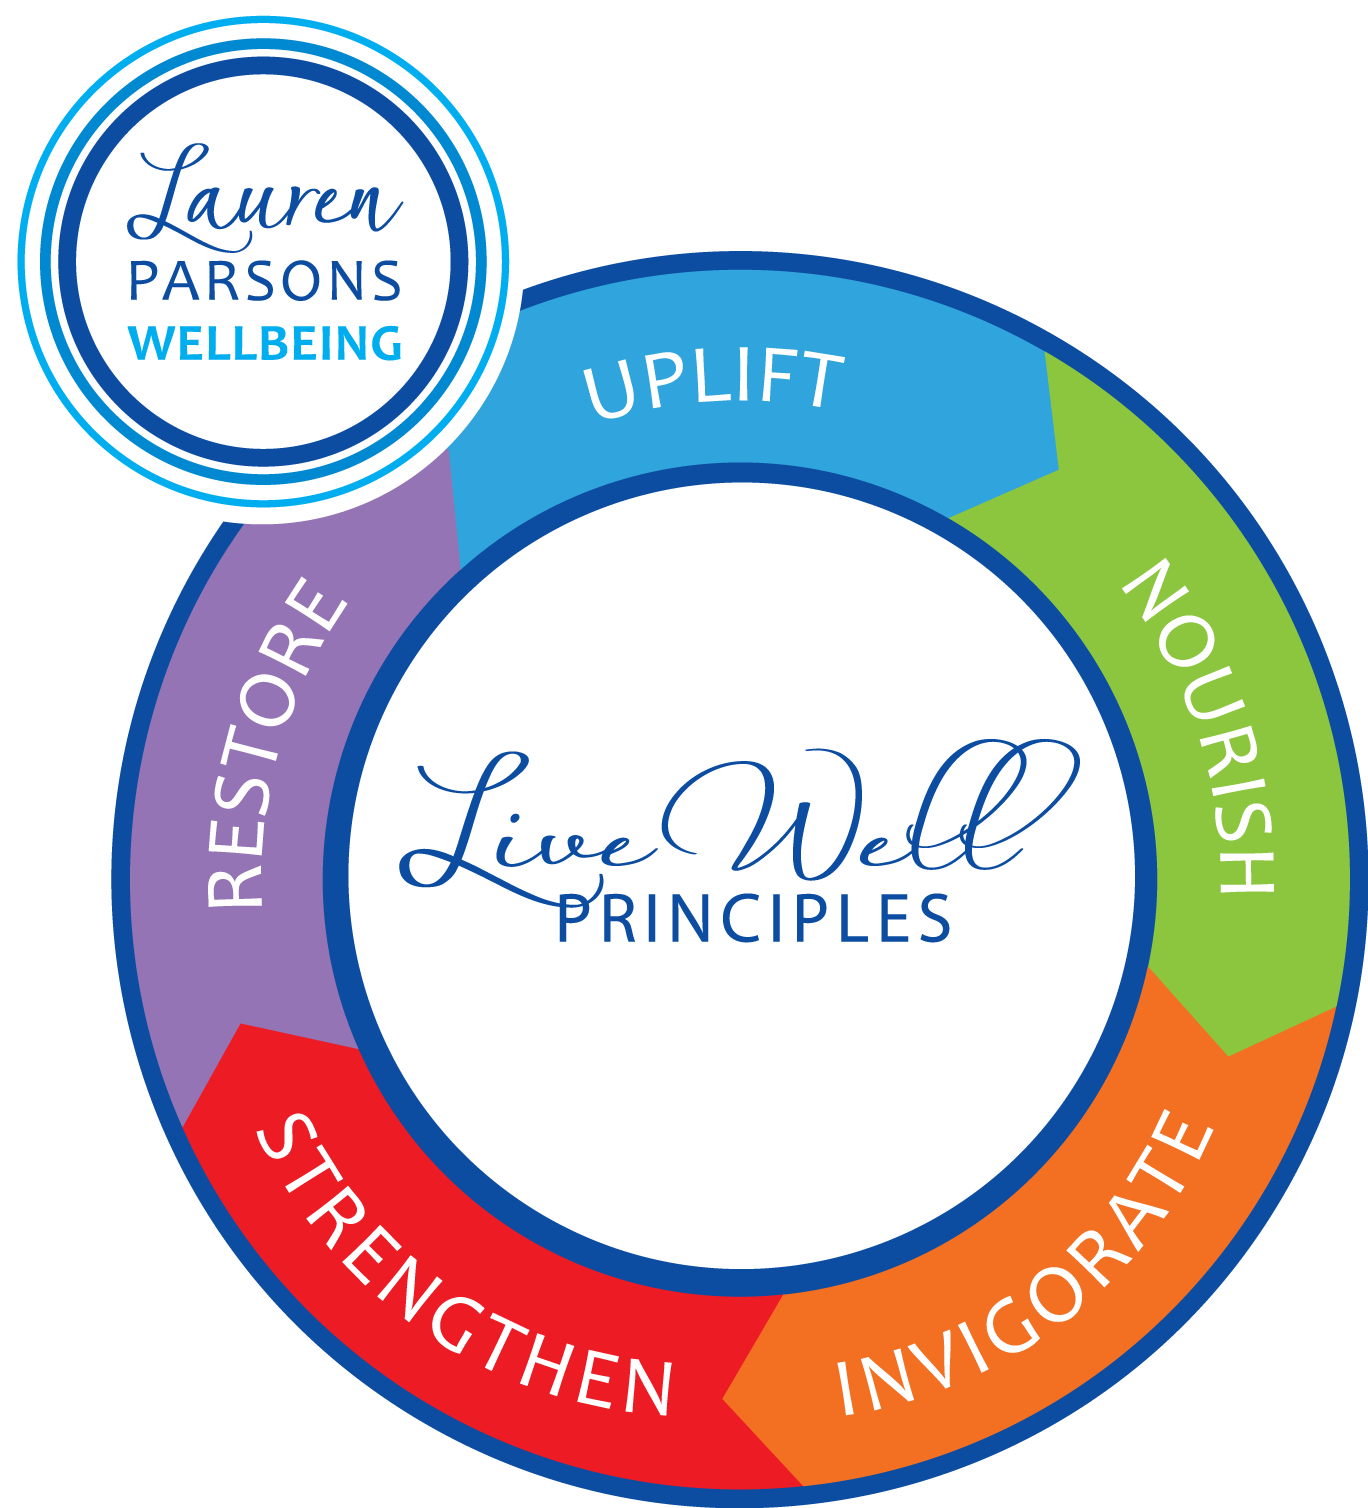 Lauren Parsons Live Well Principles for Workplace Wellness